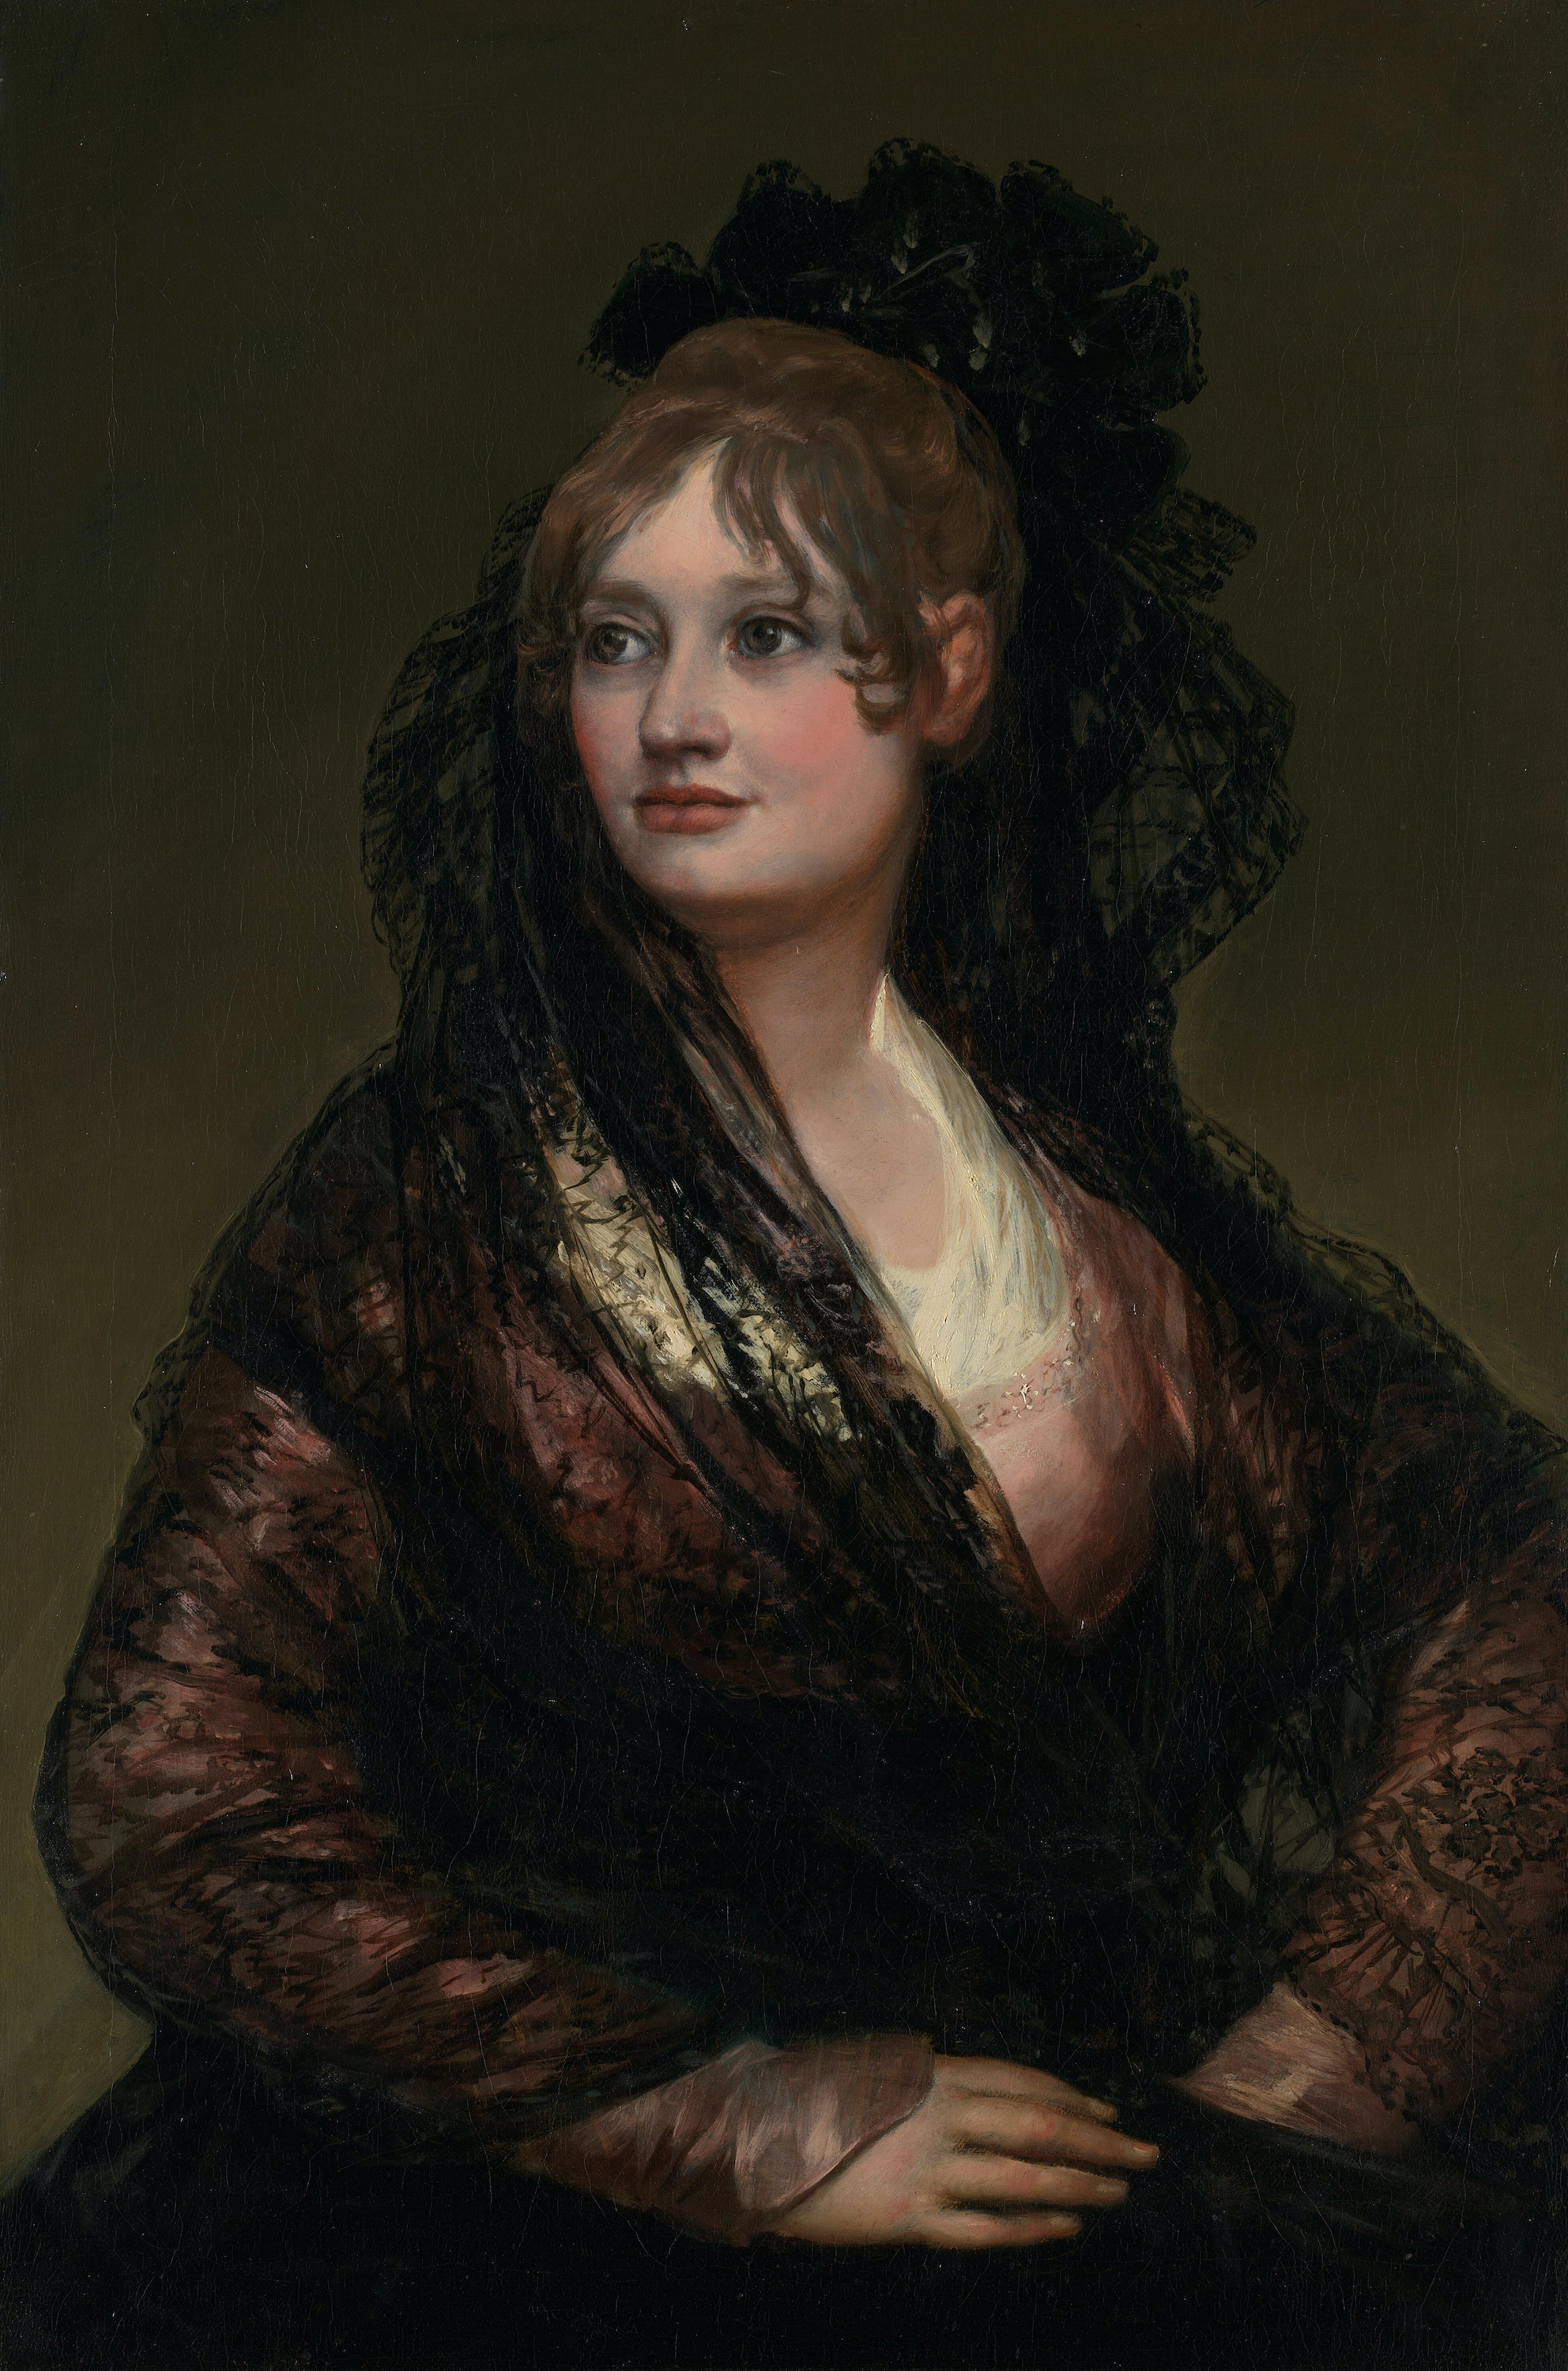 Doña Isabel de Porcel by Francisco Goya - before 1805 - 82 x 54.6 cm National Gallery